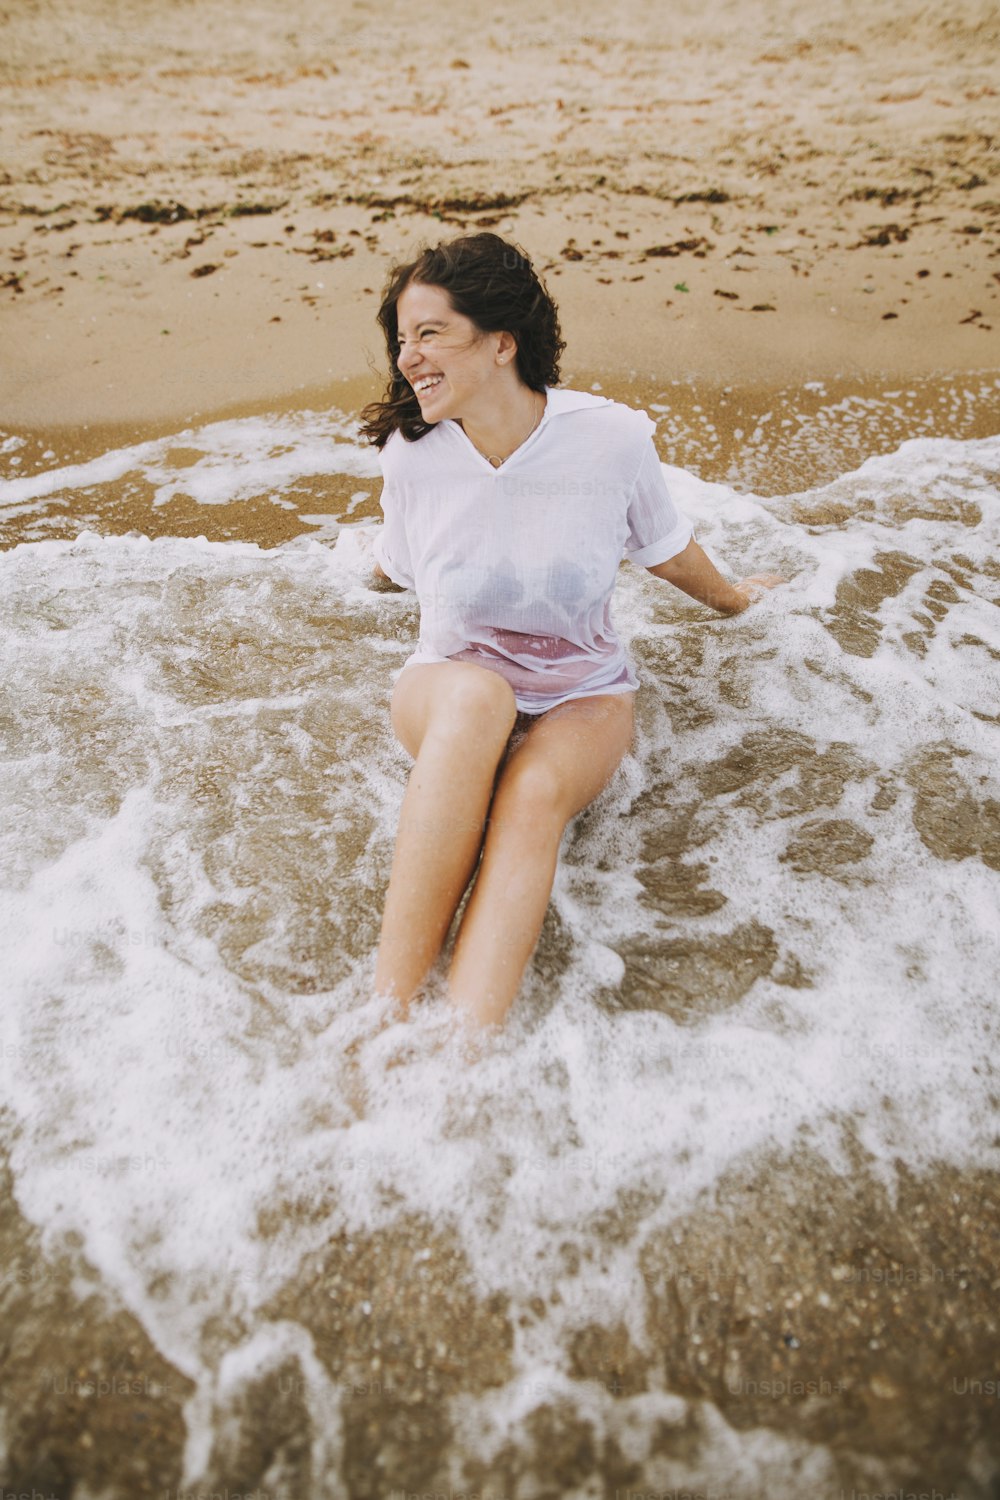 Happy young woman taking off wet white shirt on beach, back view. Stylish  girl in swimsuit relaxing on seashore. Summer vacation. Carefree moment  photo – Water Image on Unsplash